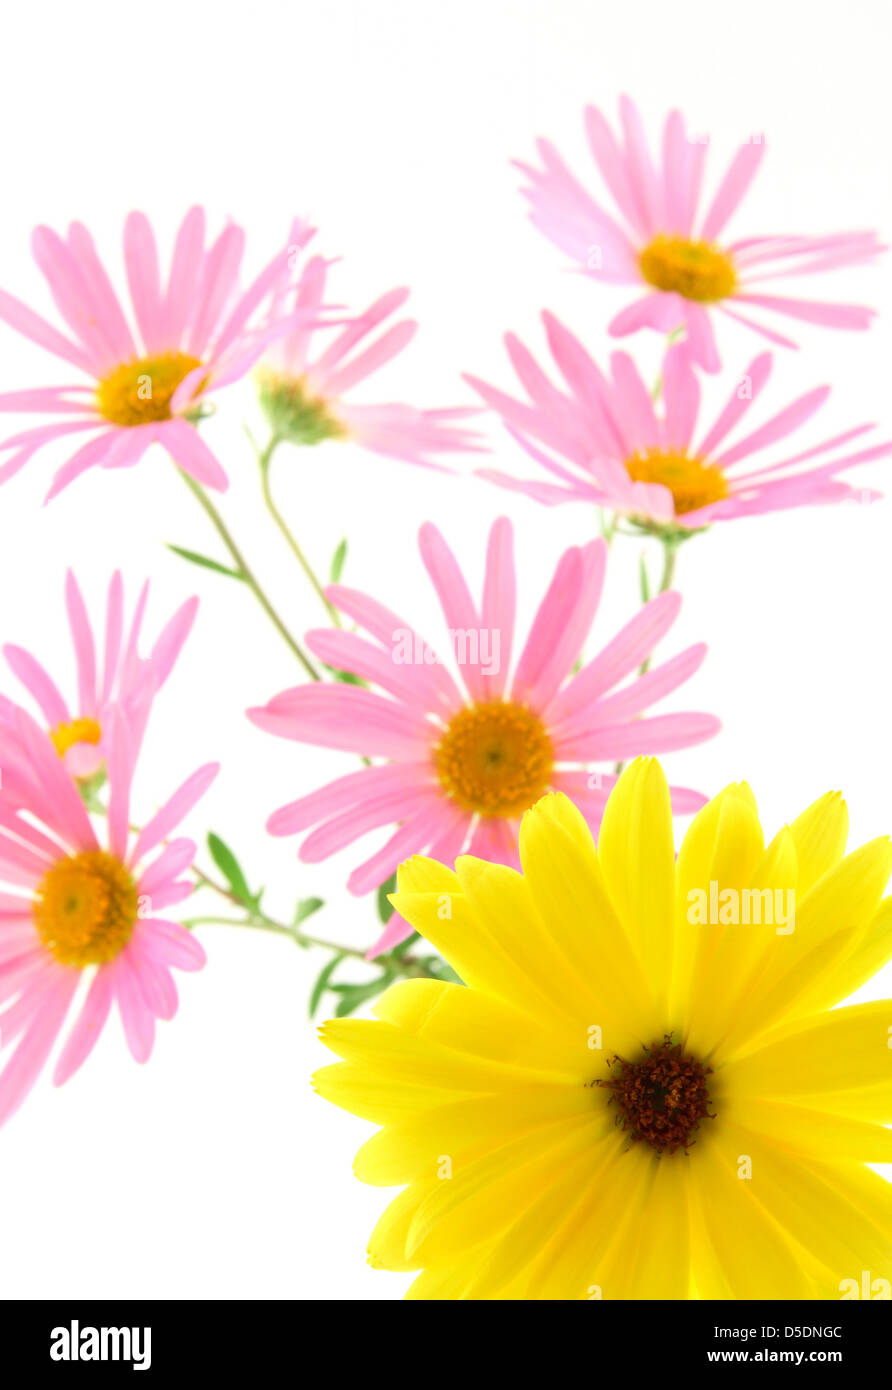 Sunny yellow gerbera daisy with pink flowers in the background. Focus on yellow flower. Stock Photo